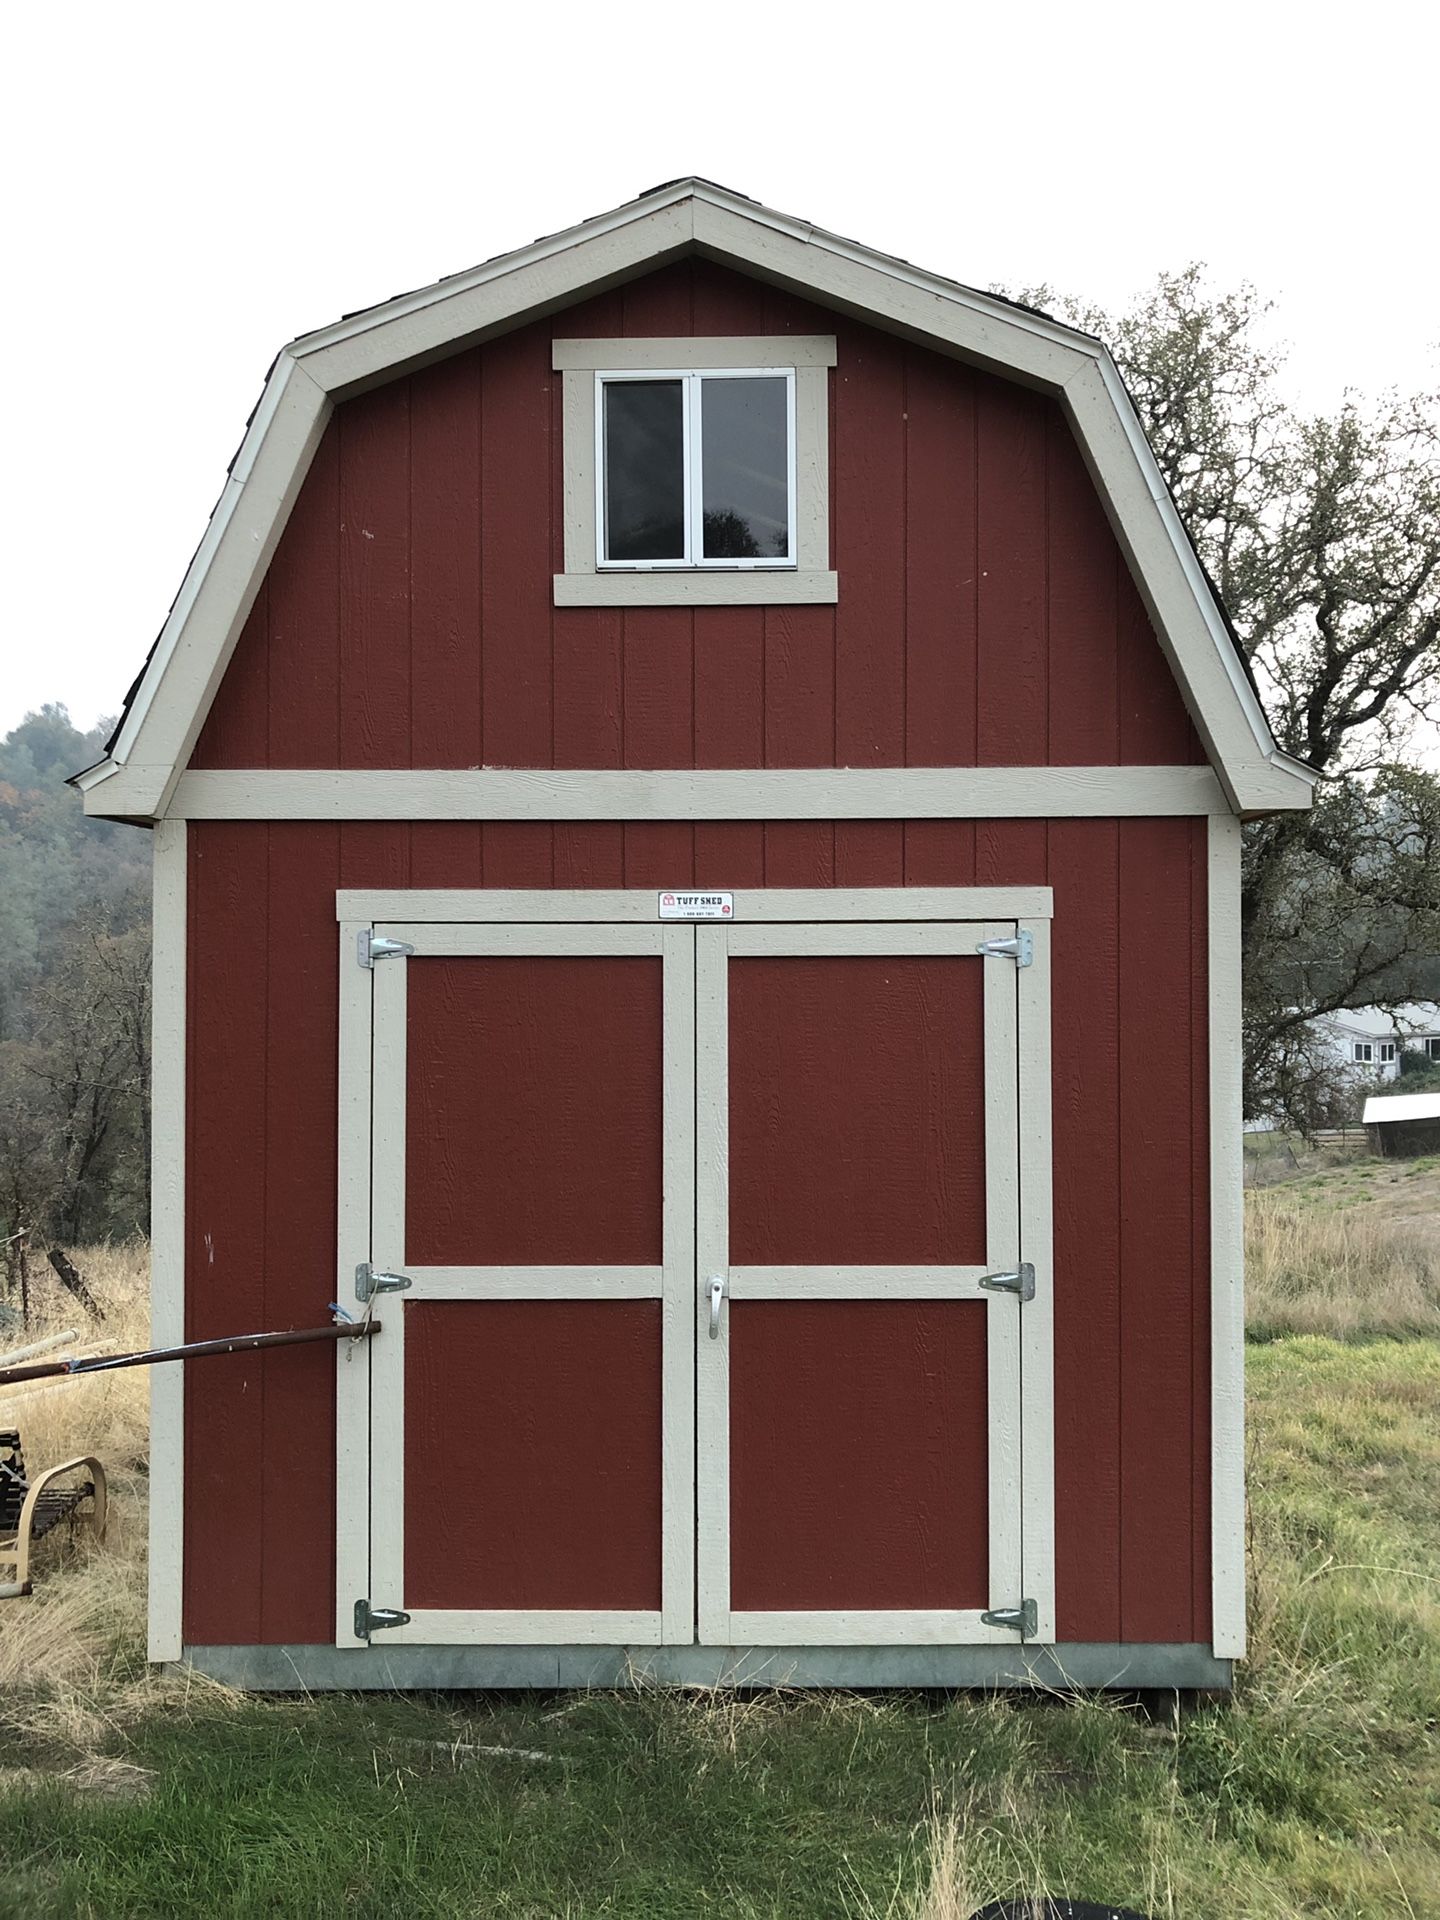 8’ by 12’ Tuff Shed